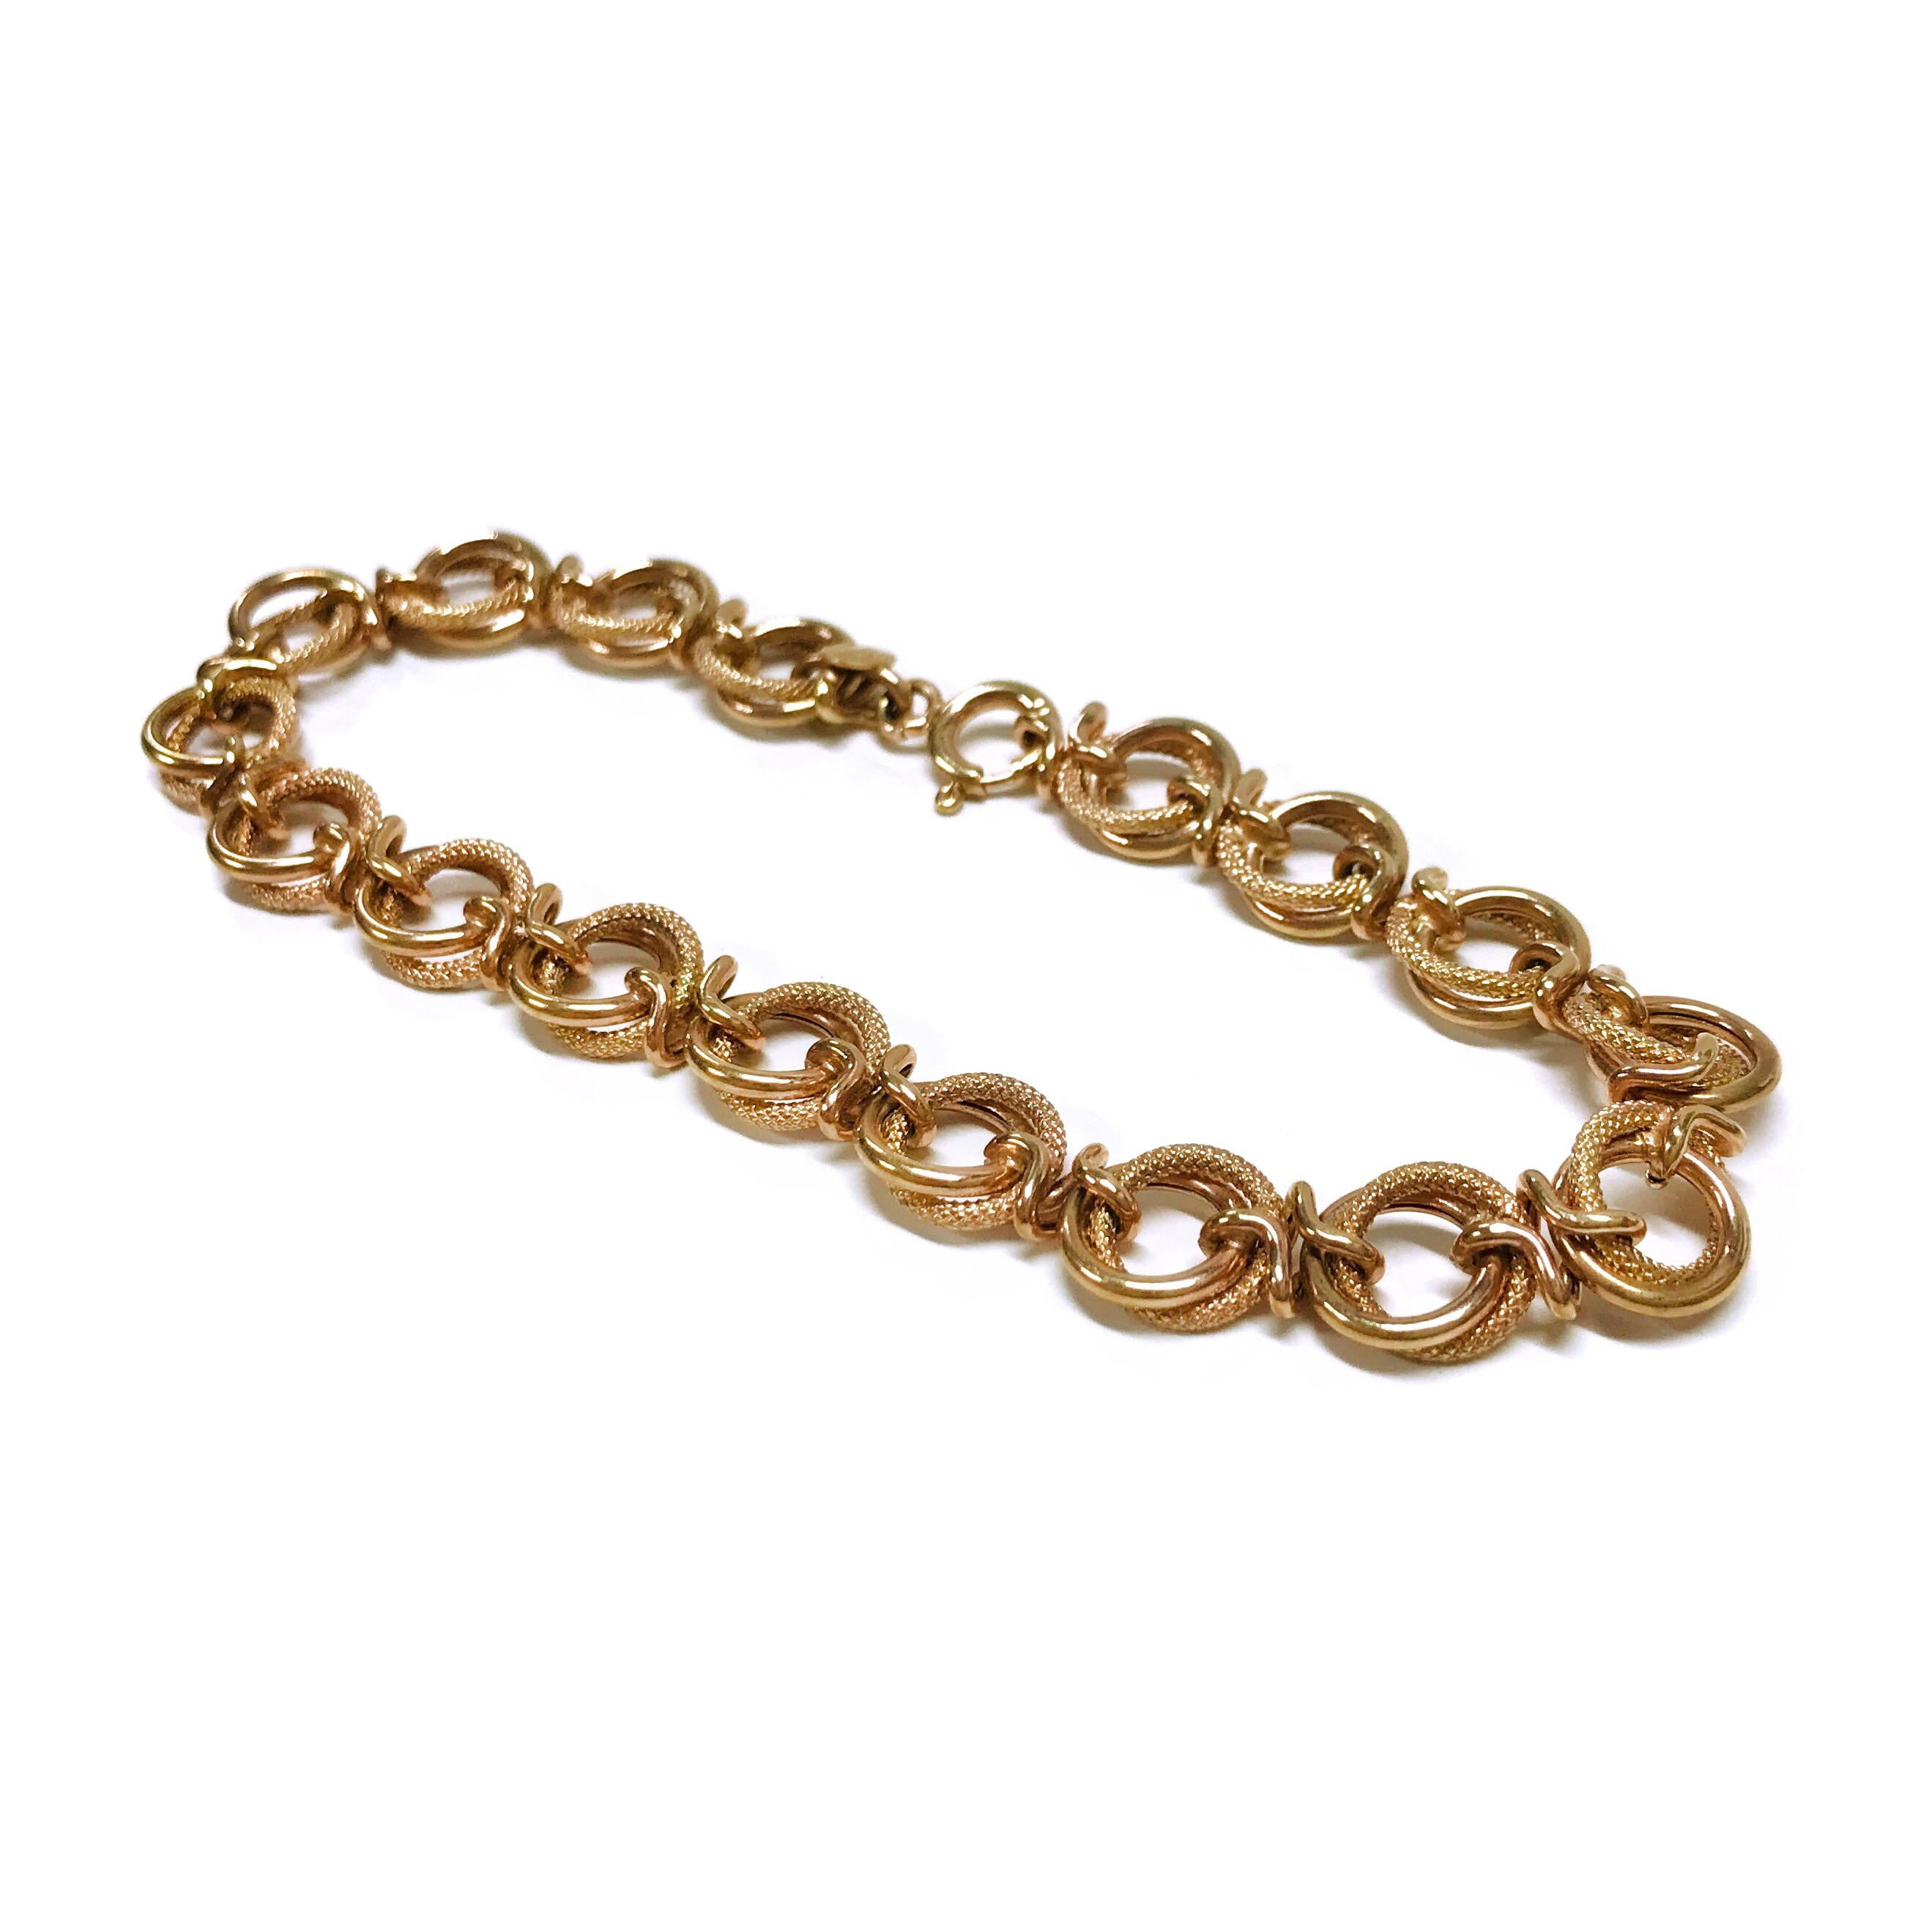 14 Karat Italian Rose Gold Double Link Bracelet. This bracelet features double links, one textured and one smooth linked together by unique twisted links. The bracelet is 8mm wide, 7.5